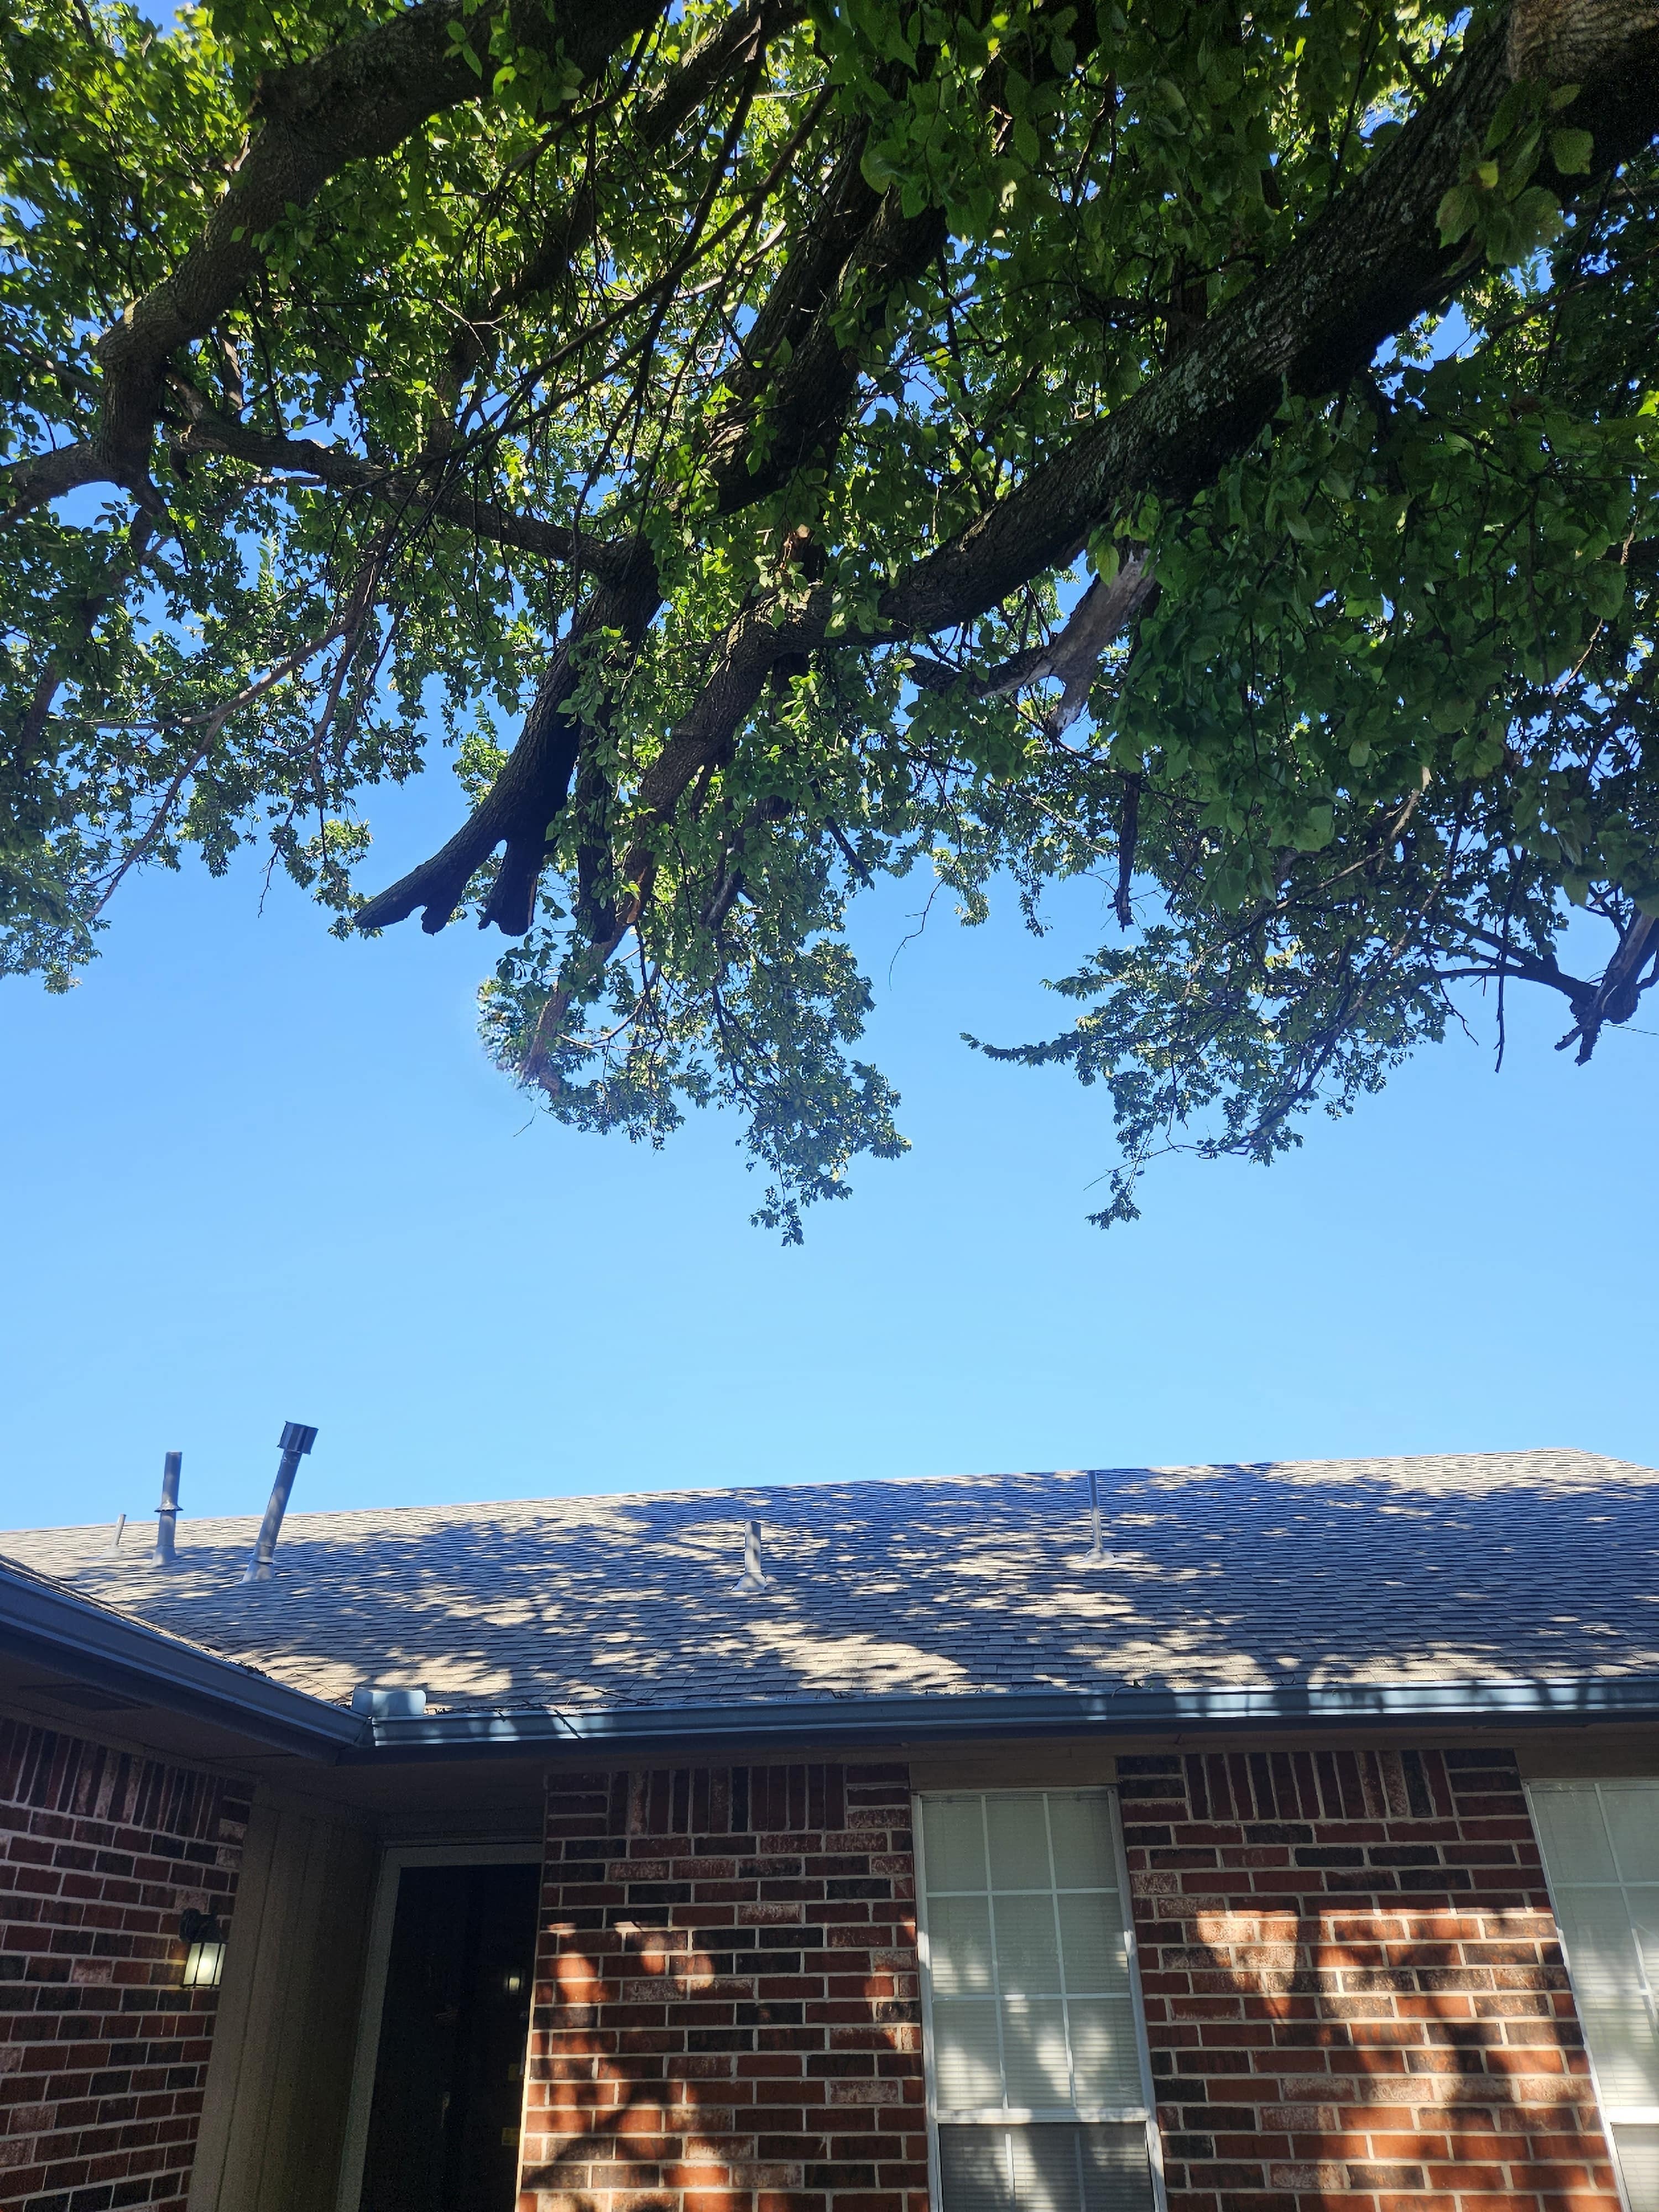 Grass & Trees, LLC Fully Insured Tree Trimming & Pruning Service in Moore, Norman & South OKC